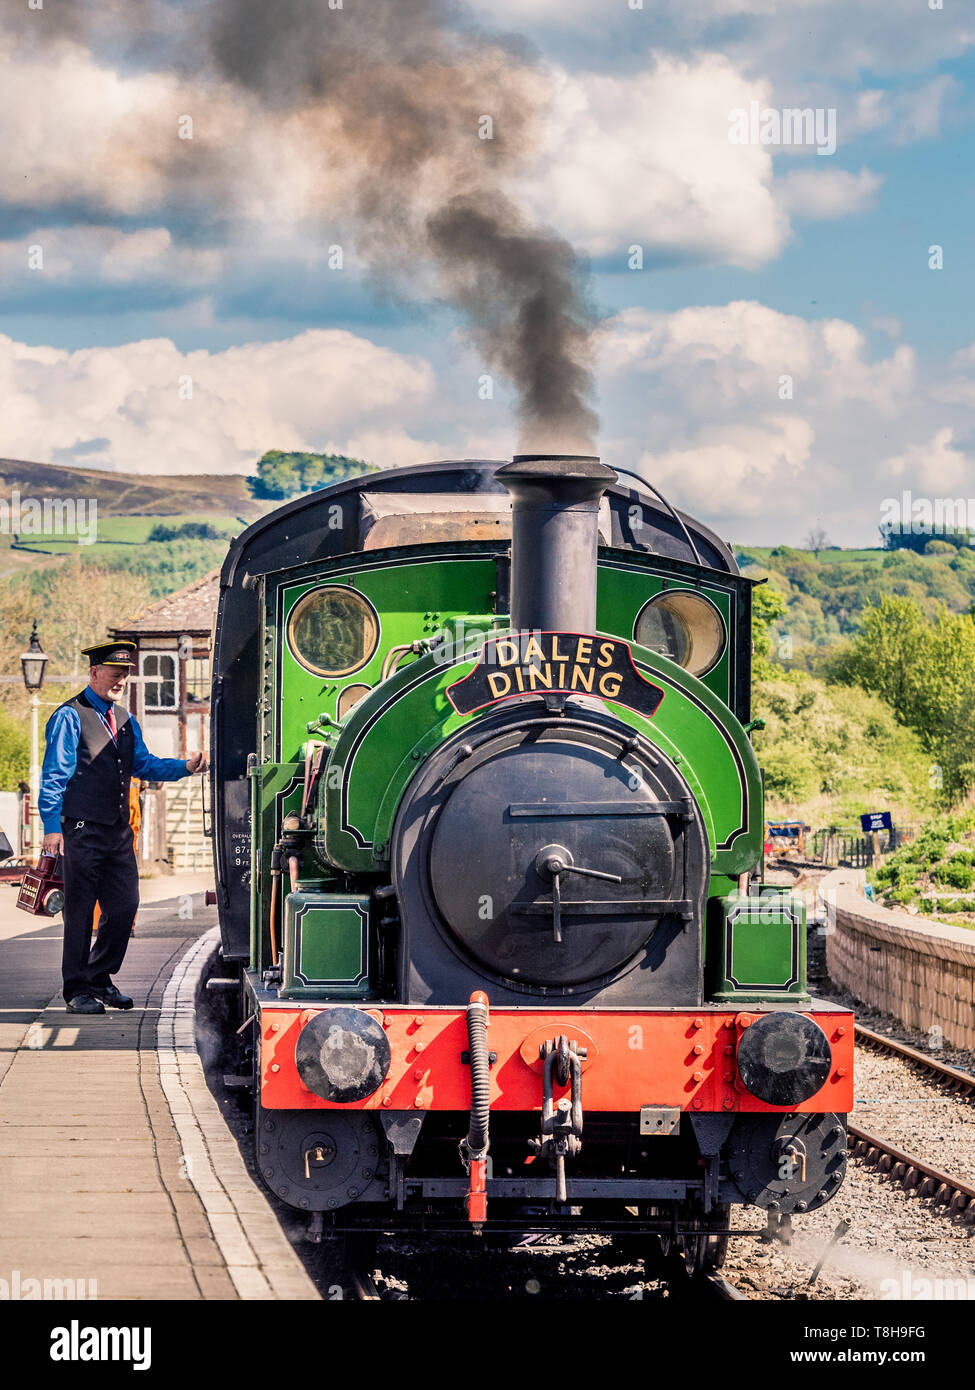 Sir Robert Alpine and Sons, Engine No. 88. Embsay and Bolton steam railway. Bolton Station, Yorkshire Dales, UK. Stock Photo